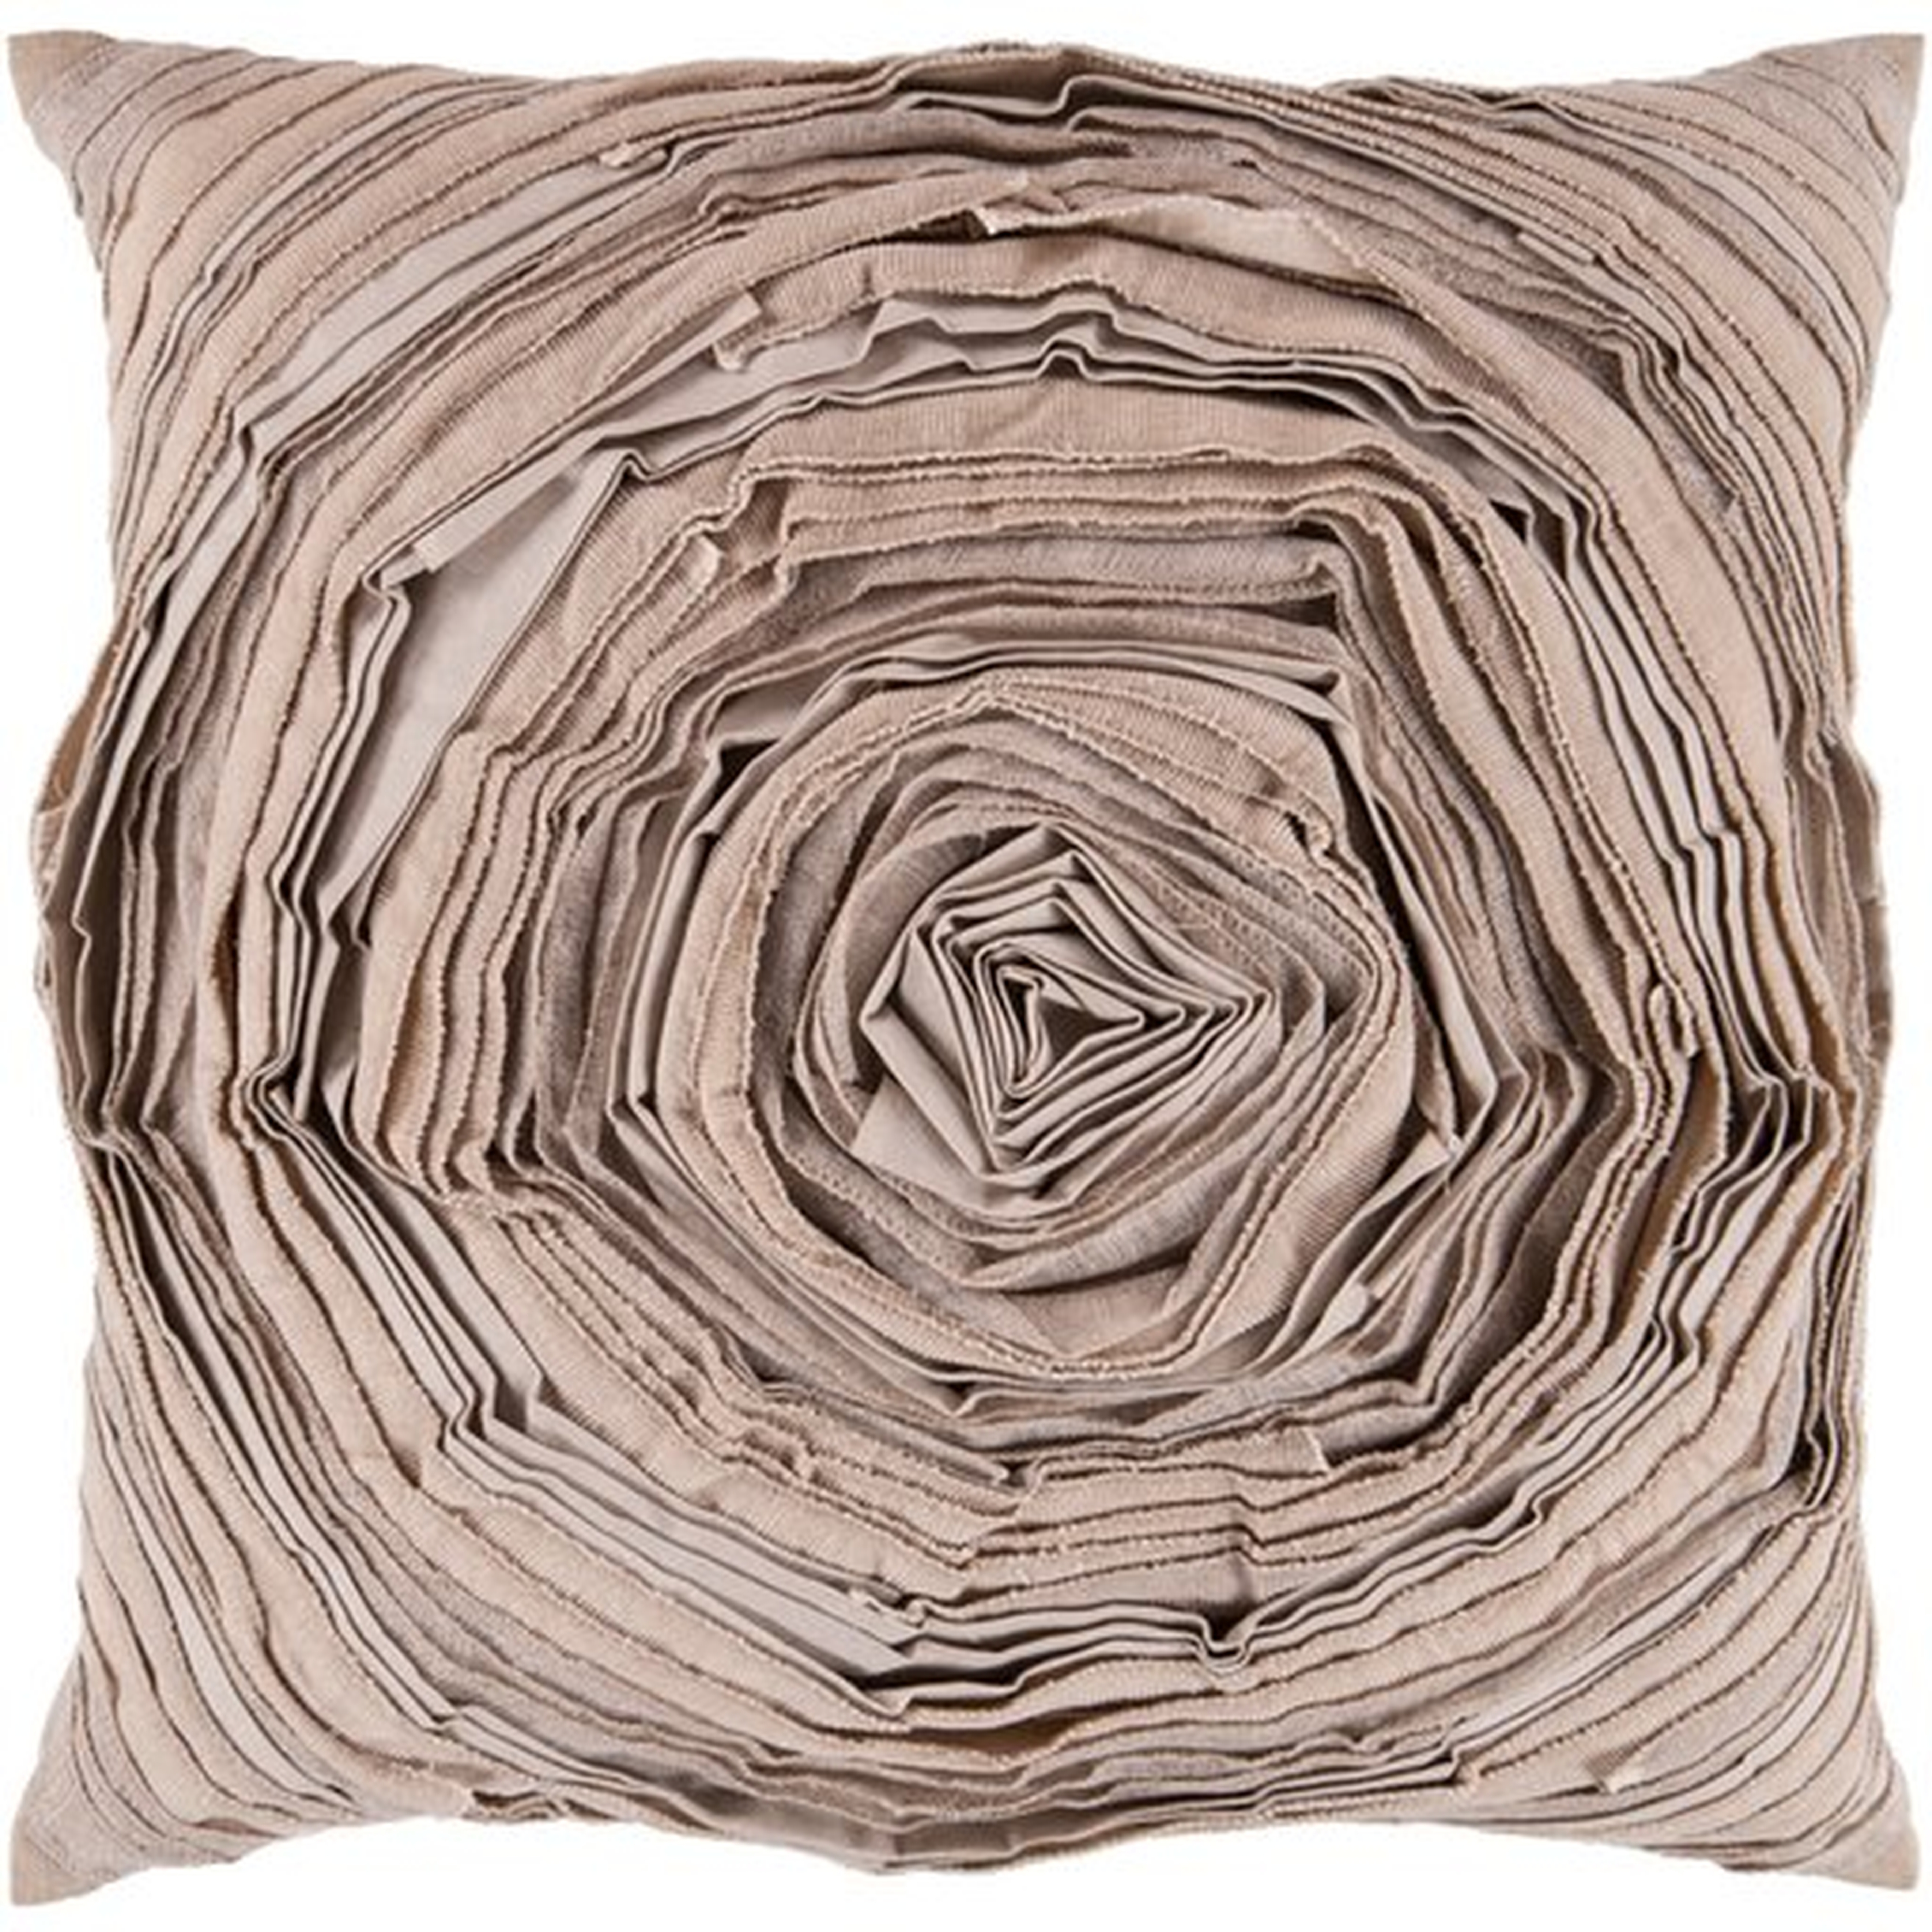 Rustic Romance Throw Pillow, 18" x 18", with poly insert - Surya